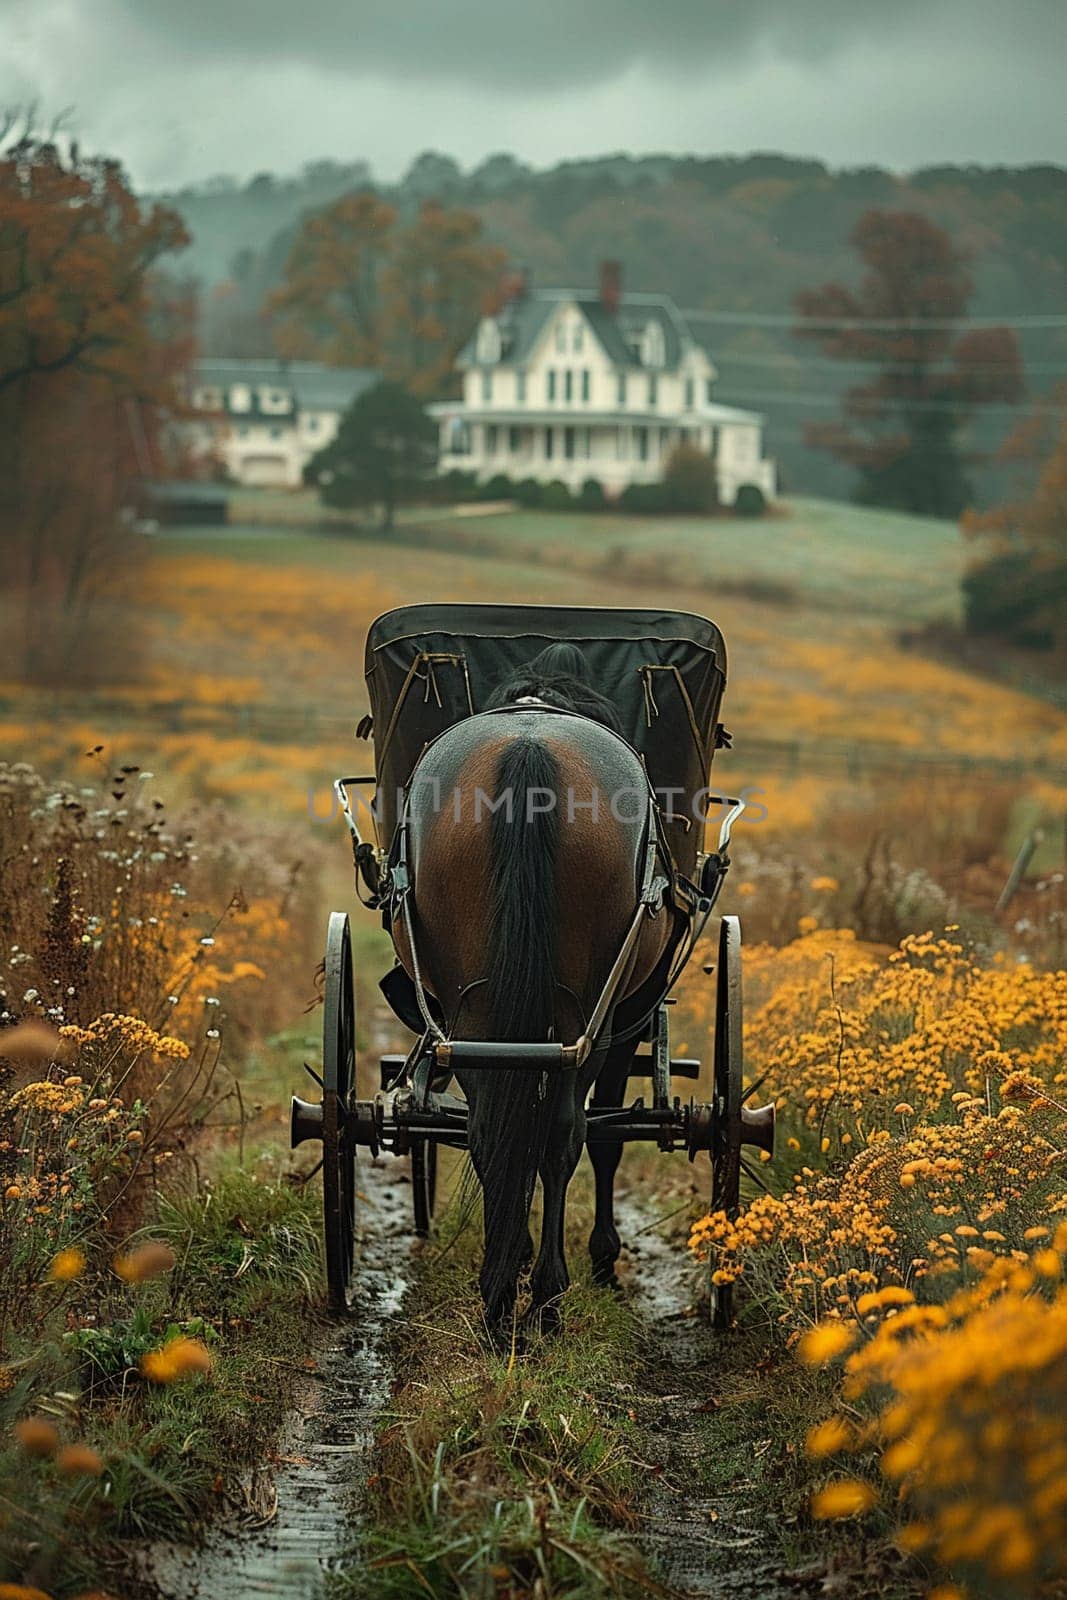 Amish Horse and Buggy Blending into a Rural Landscape, The simple life blurs into the fields, a dedication to community and tradition.